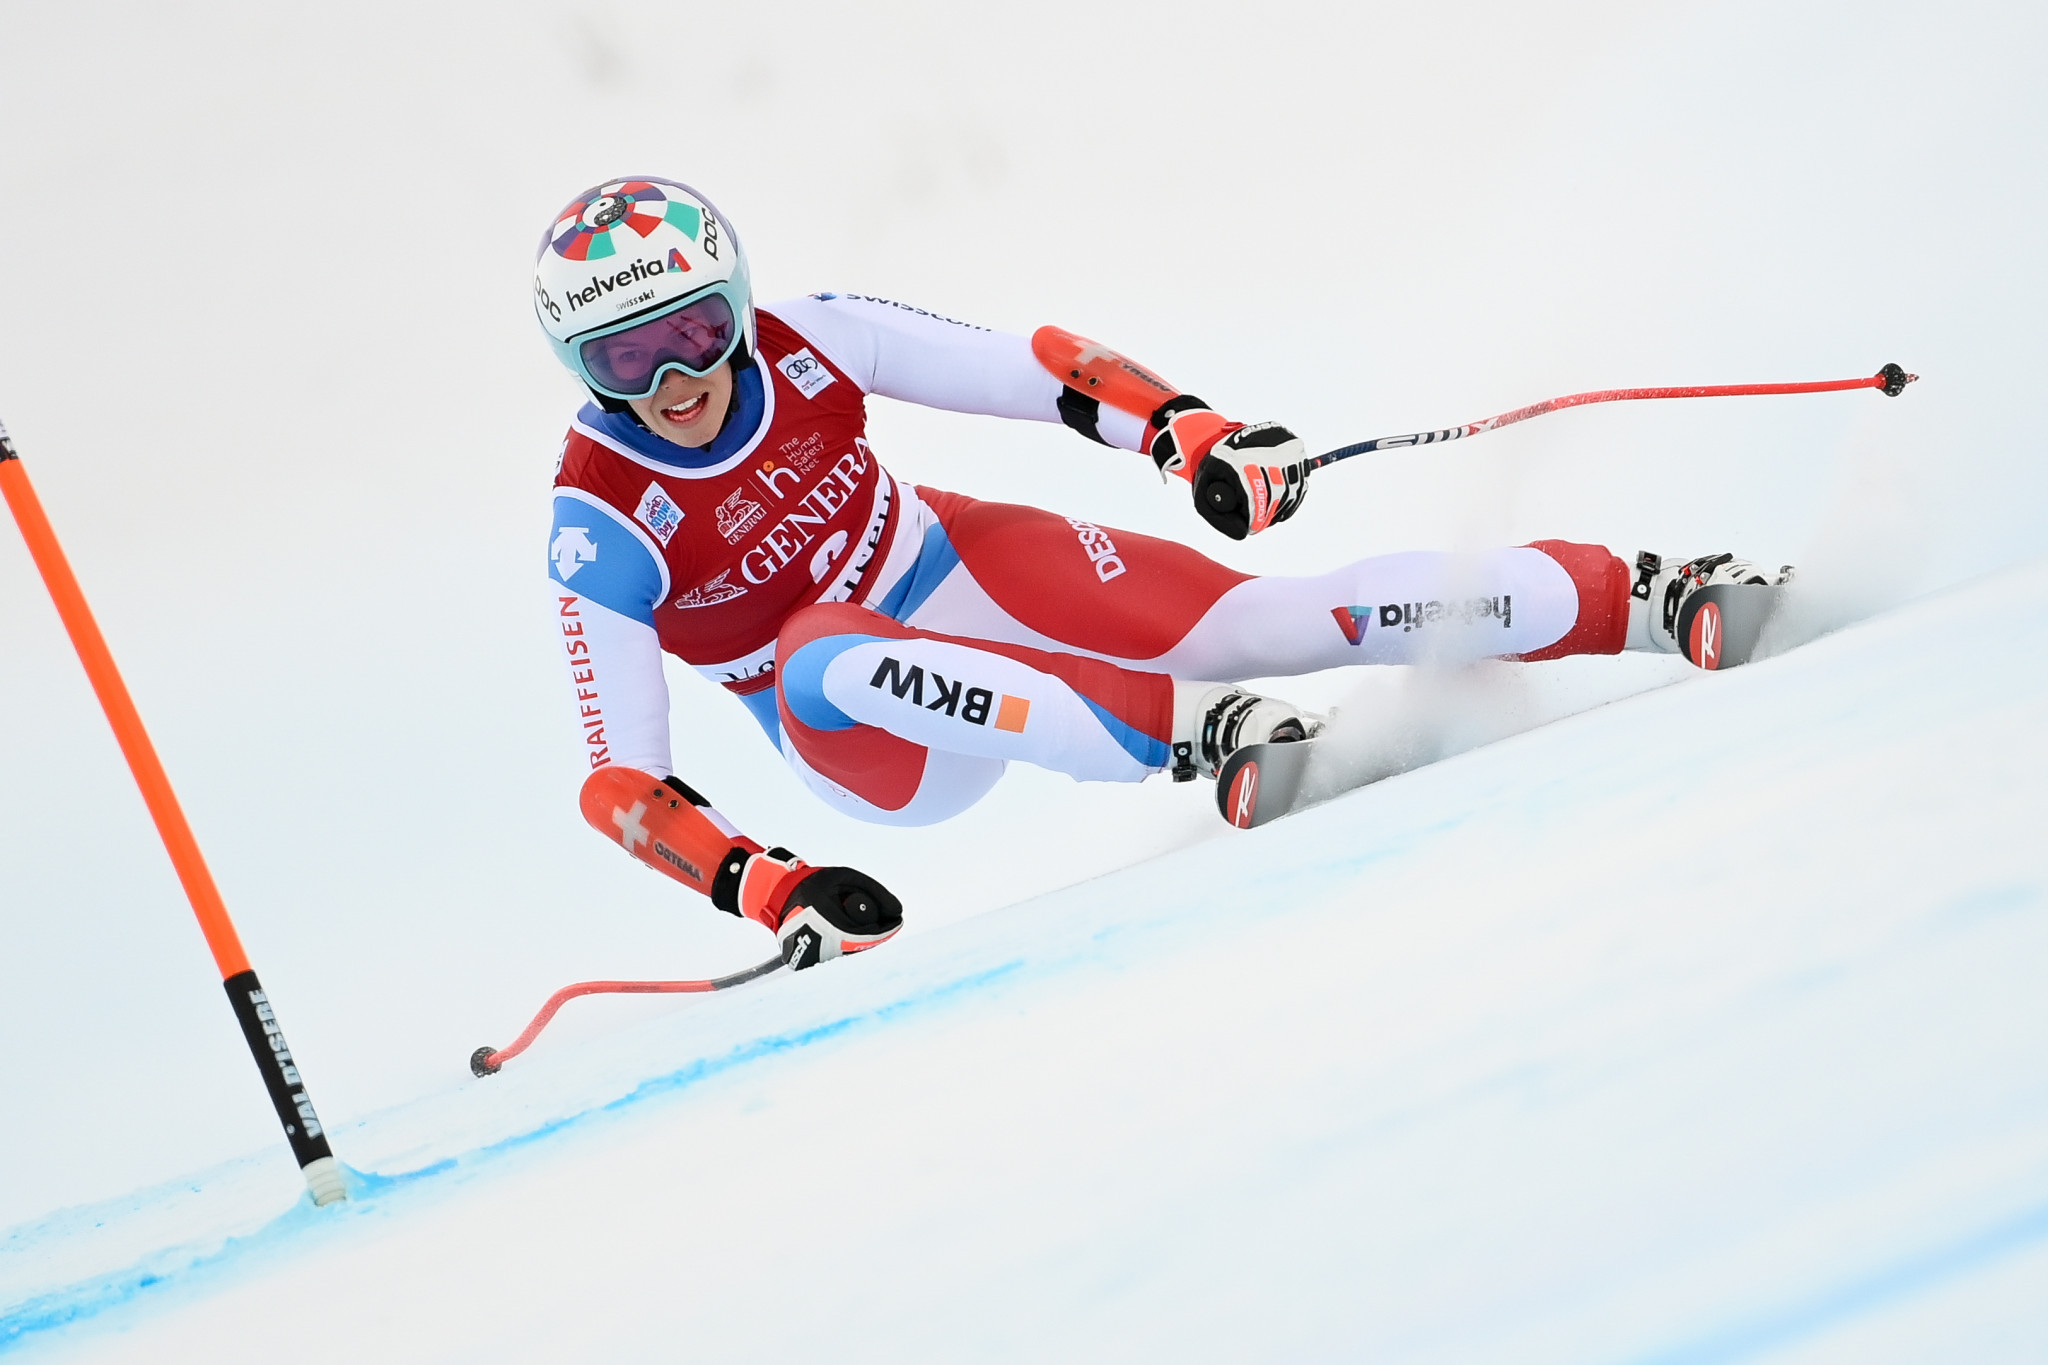 Michelle Gisin claimed her first win of the calendar year at the FIS Alpine Ski World Cup women's slalom in Semmering ©Getty Images